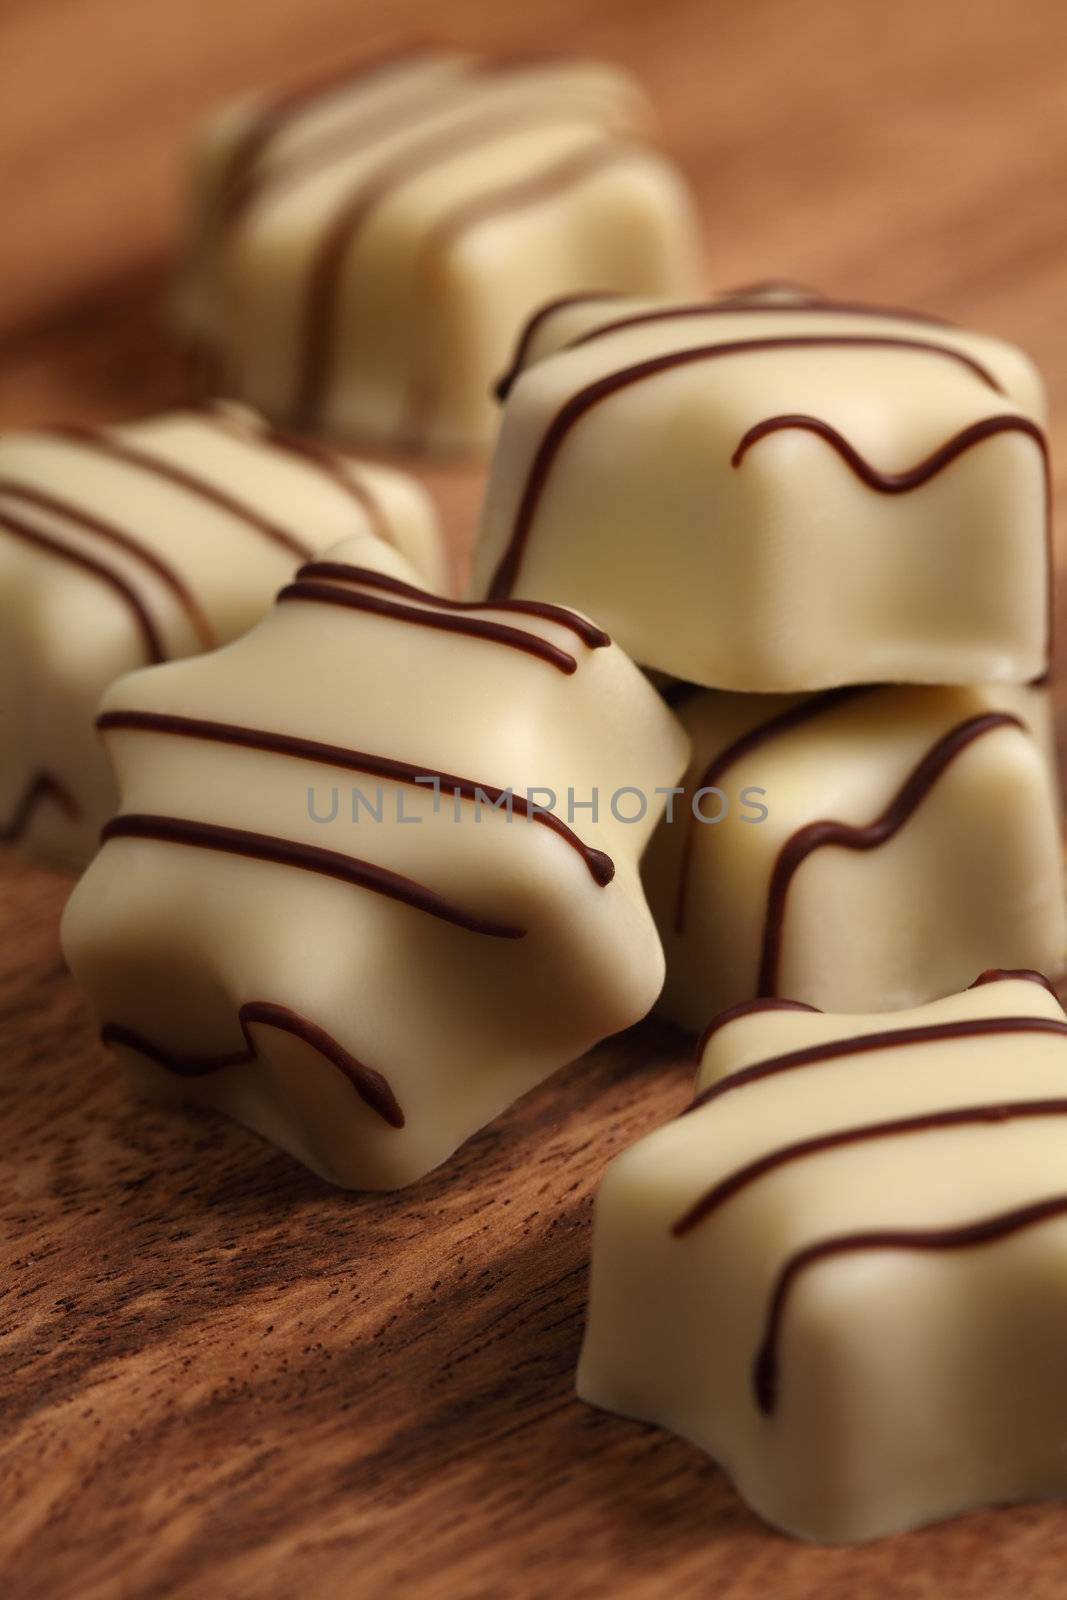 White chocolates by sumners